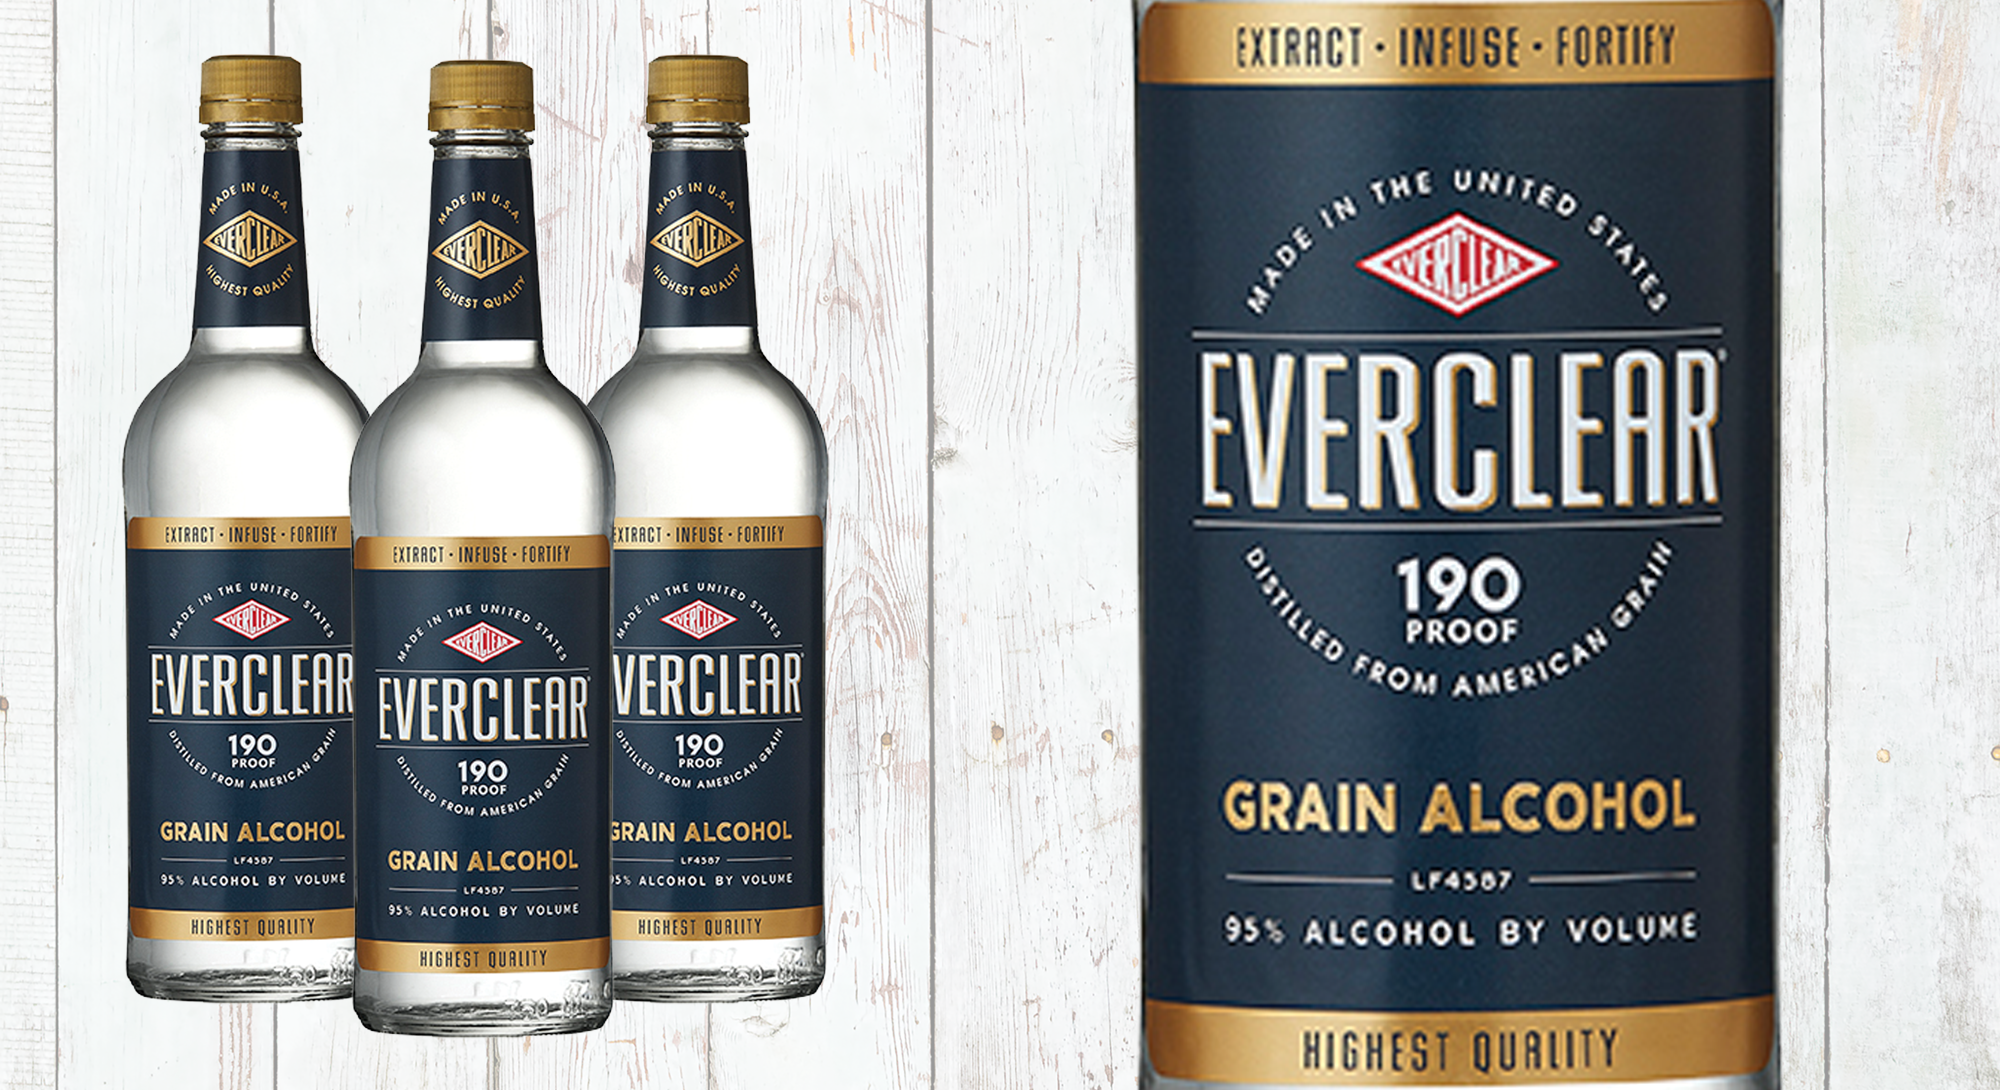 Everclear ® Grain Alcohol launched new, sophisticated packaging that illust...